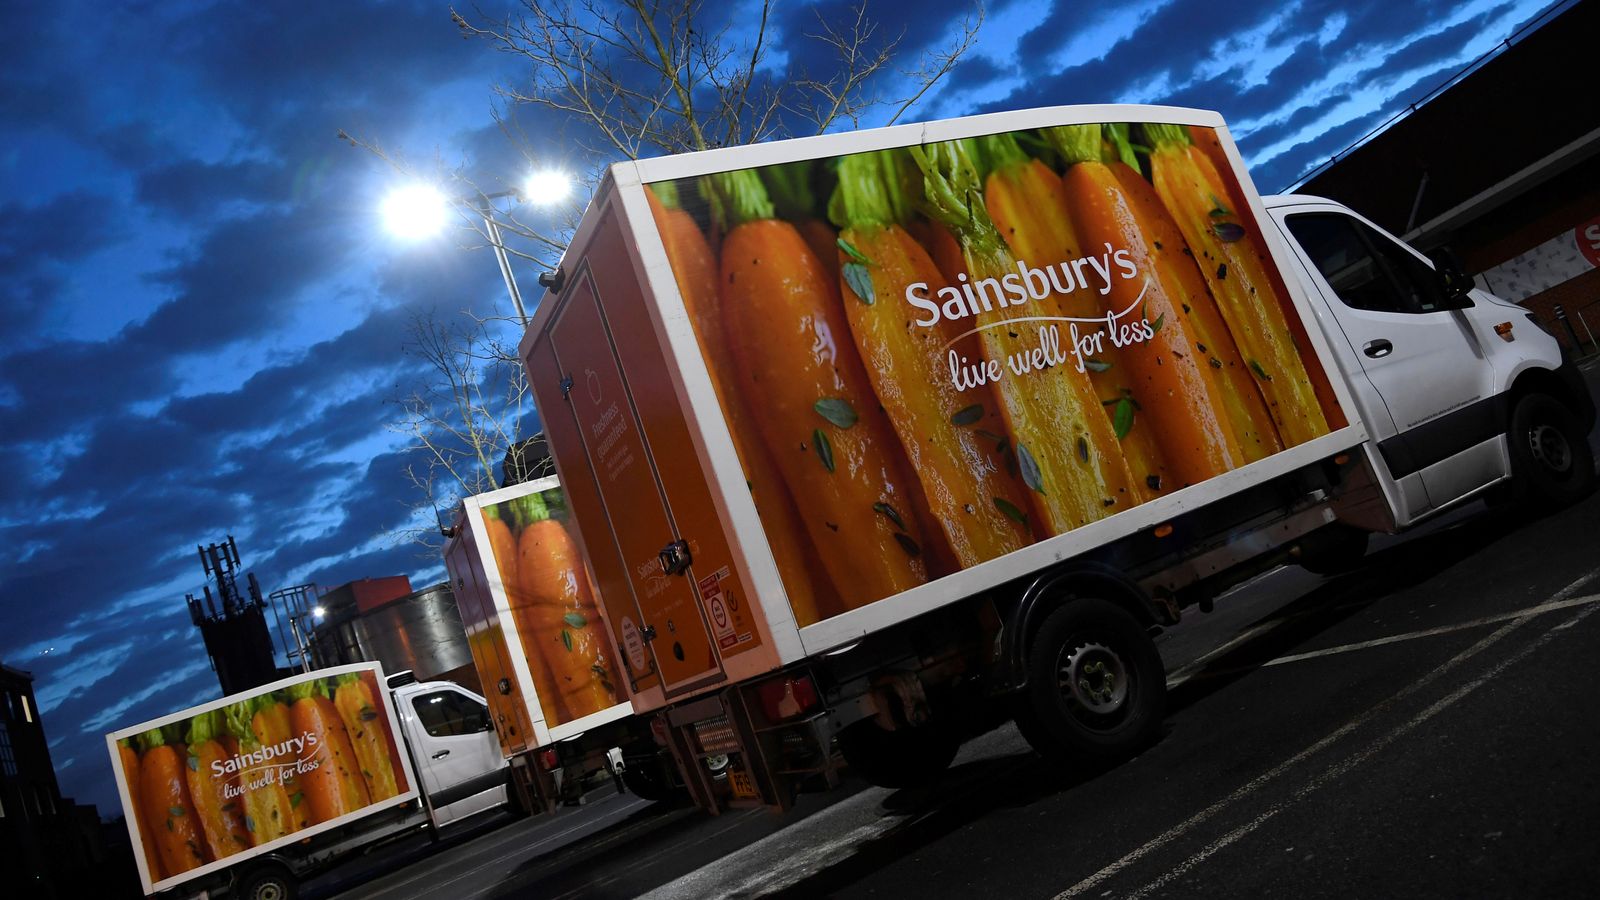 Sainsbury's suffering 'technical issues' and is unable to fulfil 'vast majority' of online deliveries